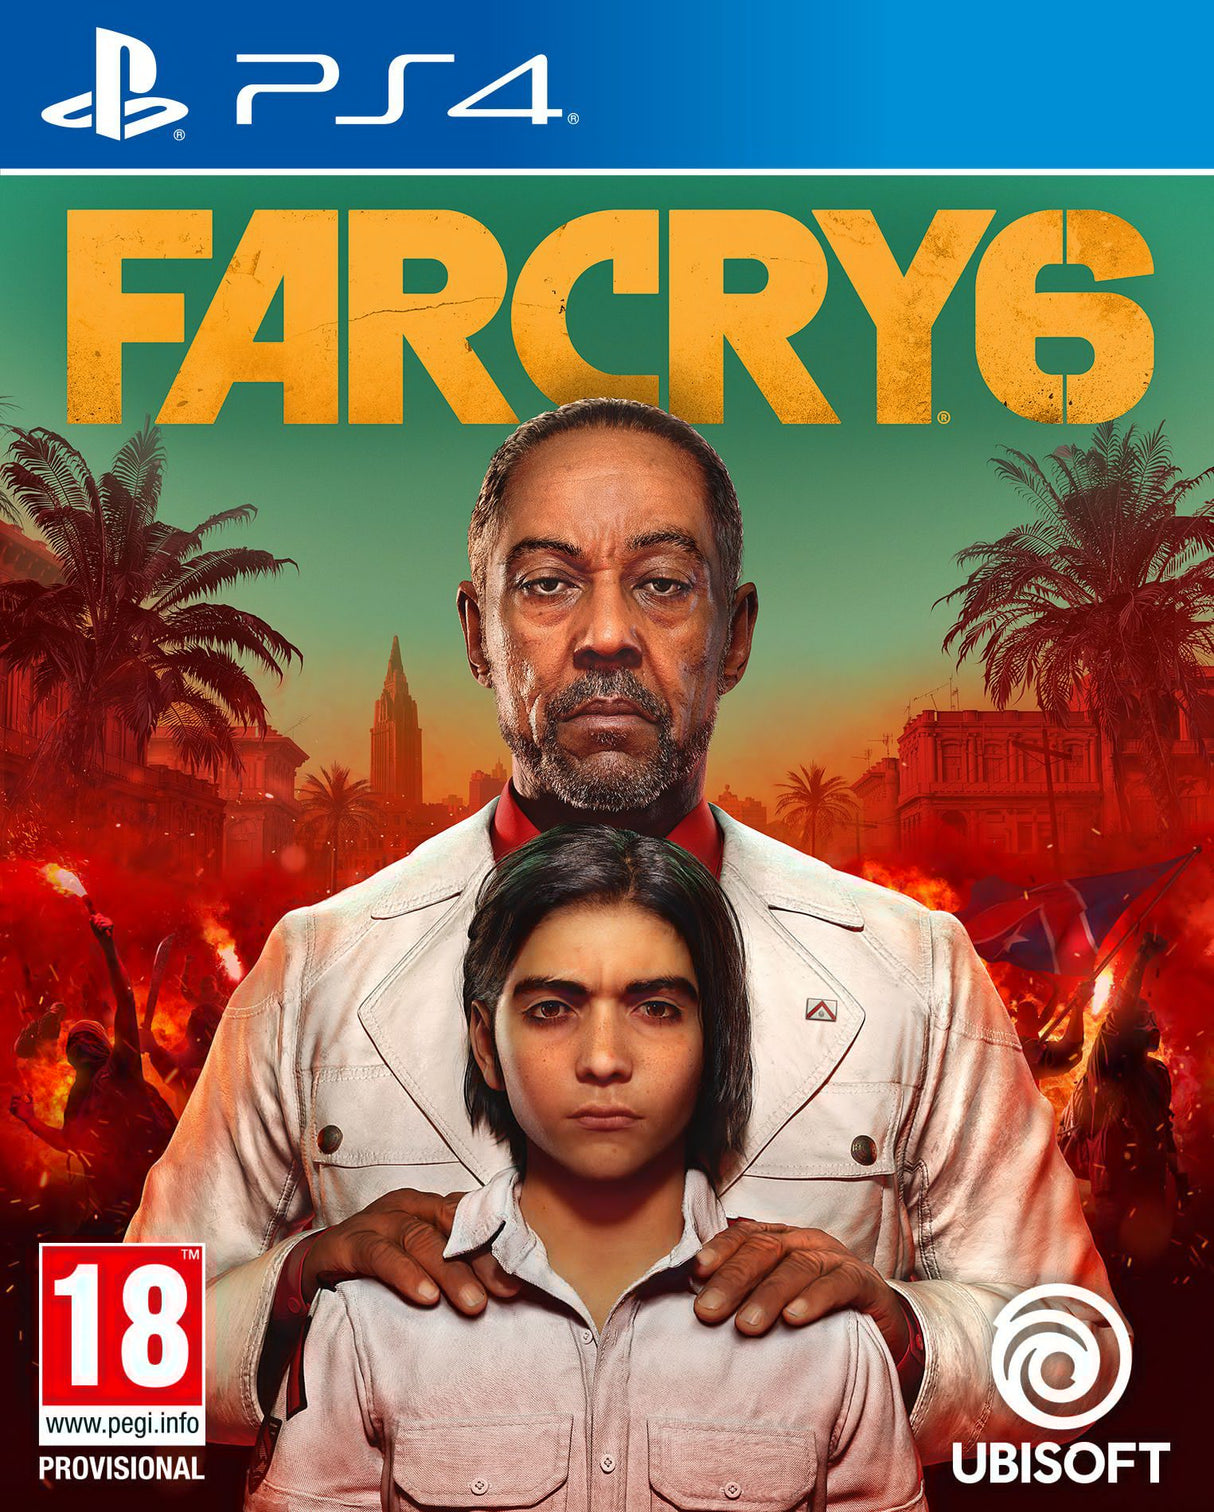 Far Cry 6 Standard Edition For PlayStation 4 “Region 2” - Level UpUBISOFTPlaystation Video Games3.31E+12